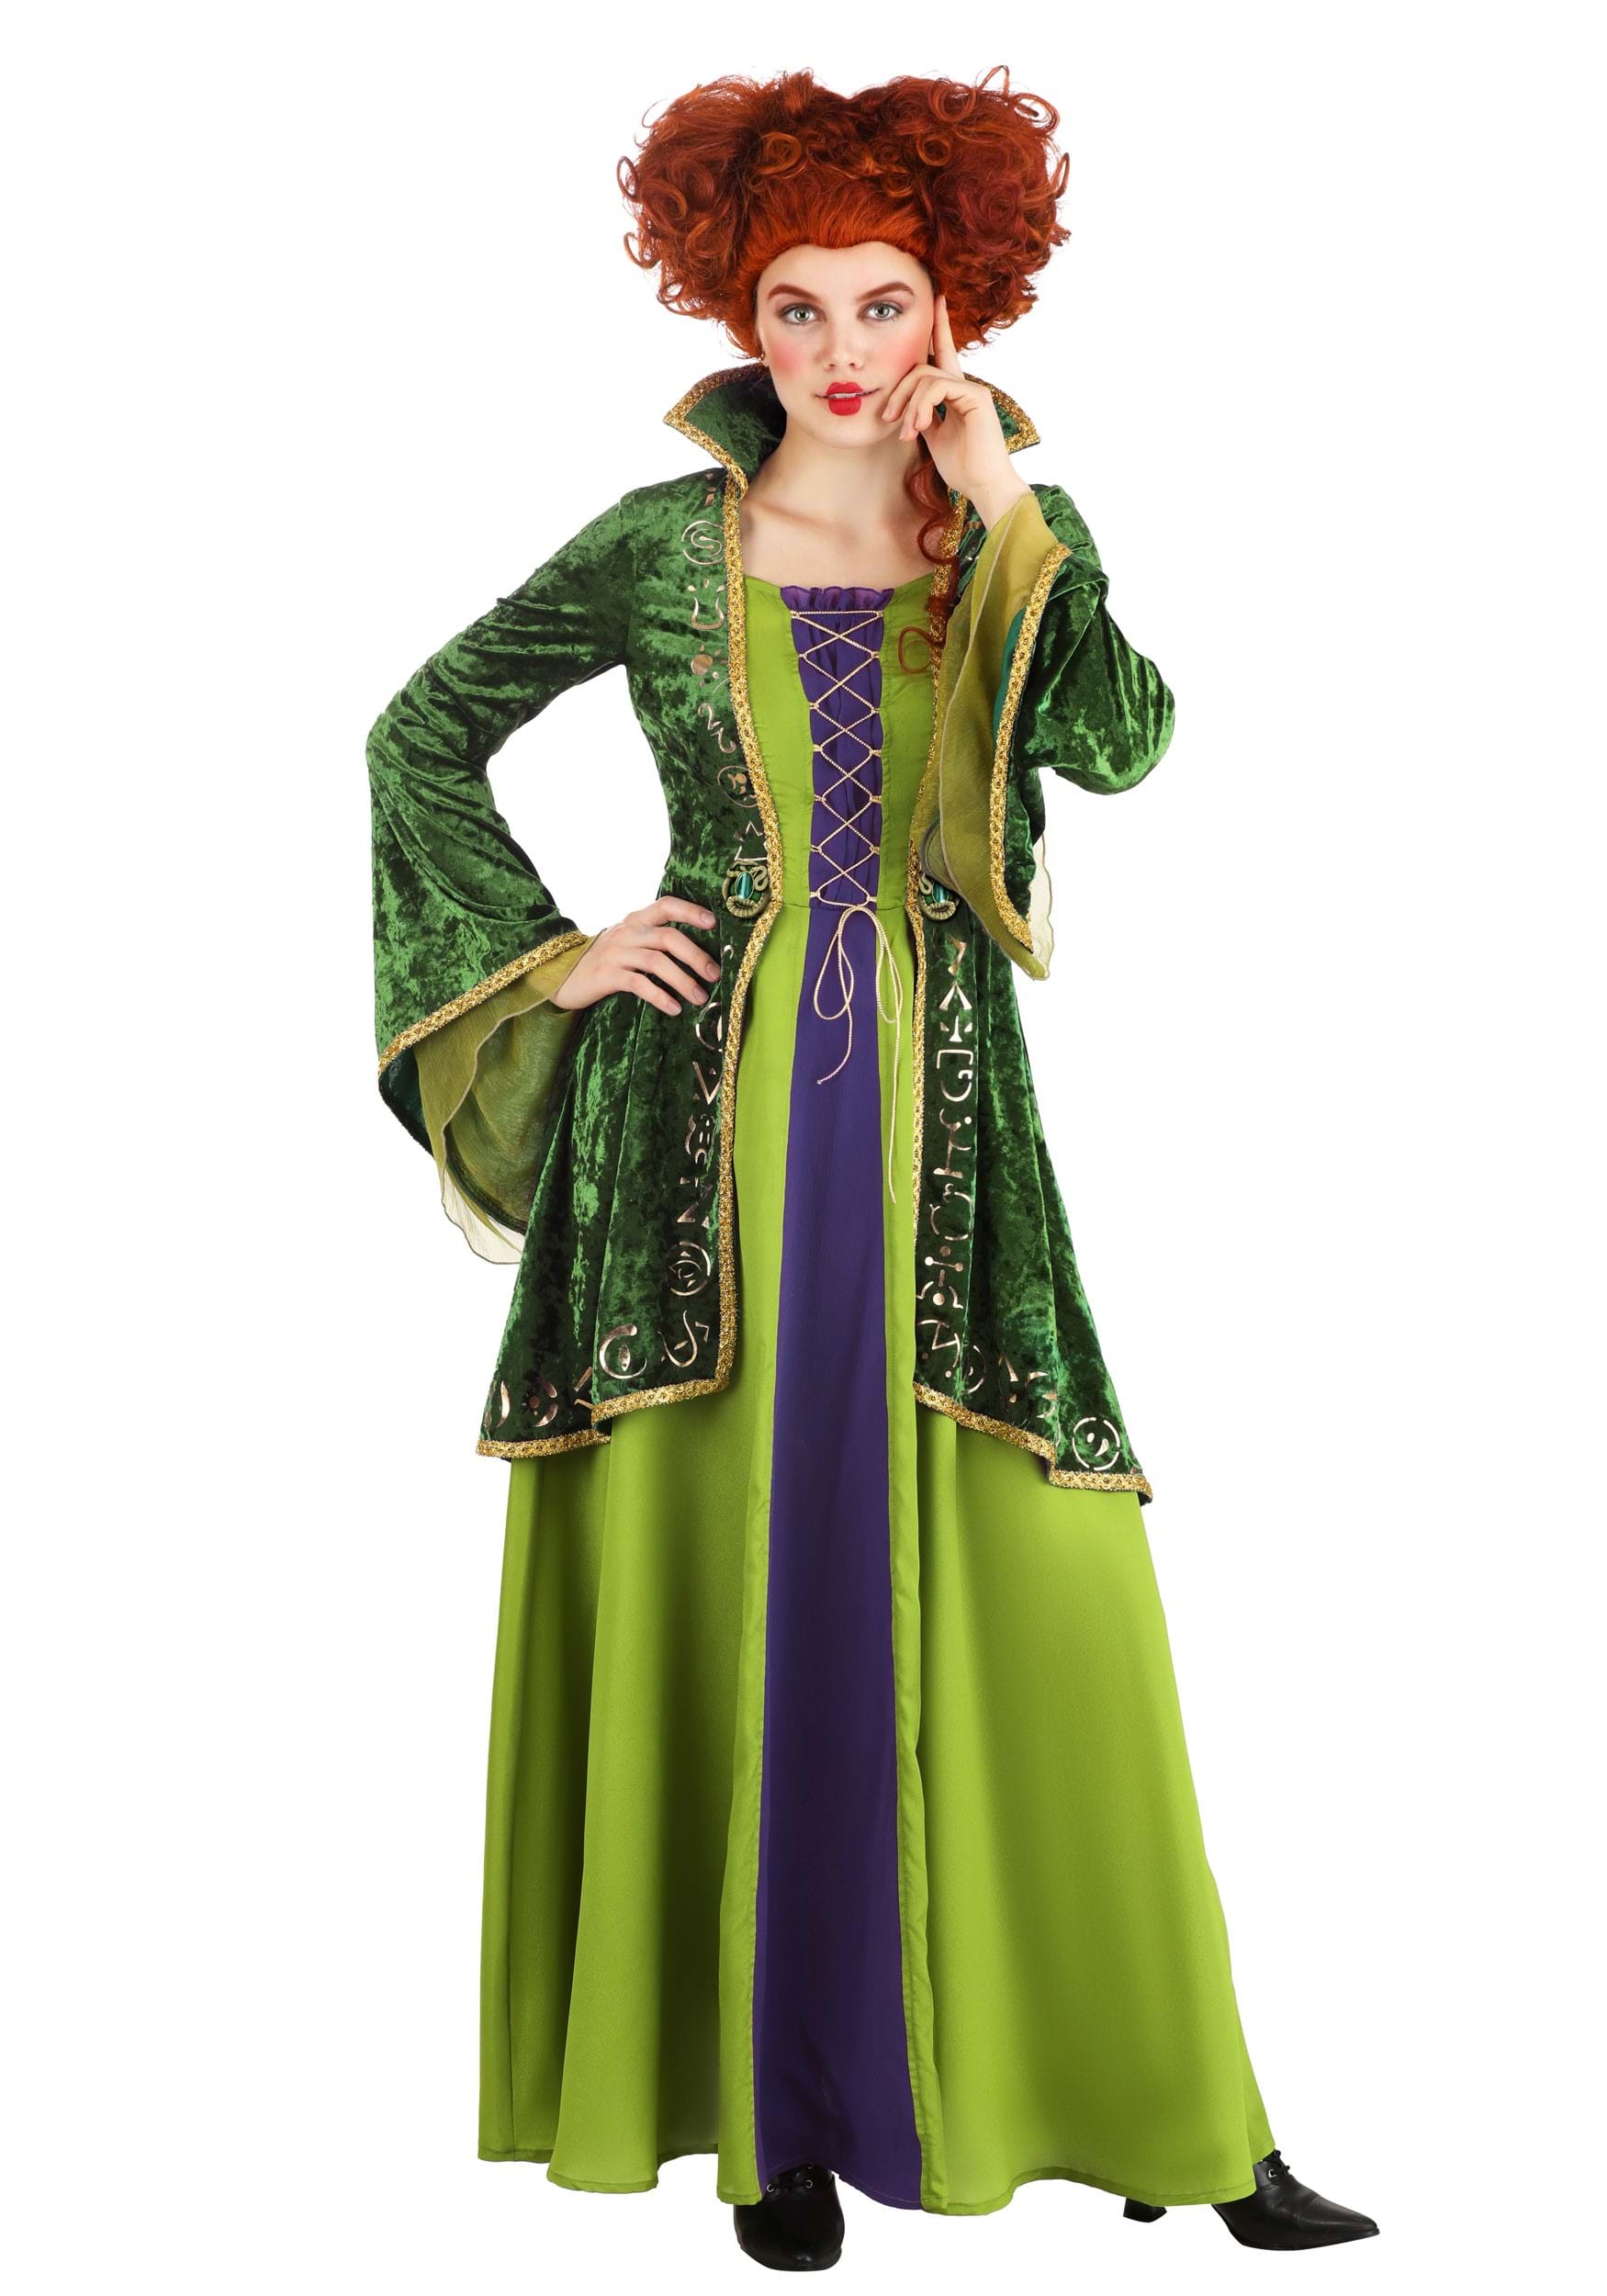 Image of Adult Deluxe Disney Winifred Sanderson Costume ID FUN4728AD-XS